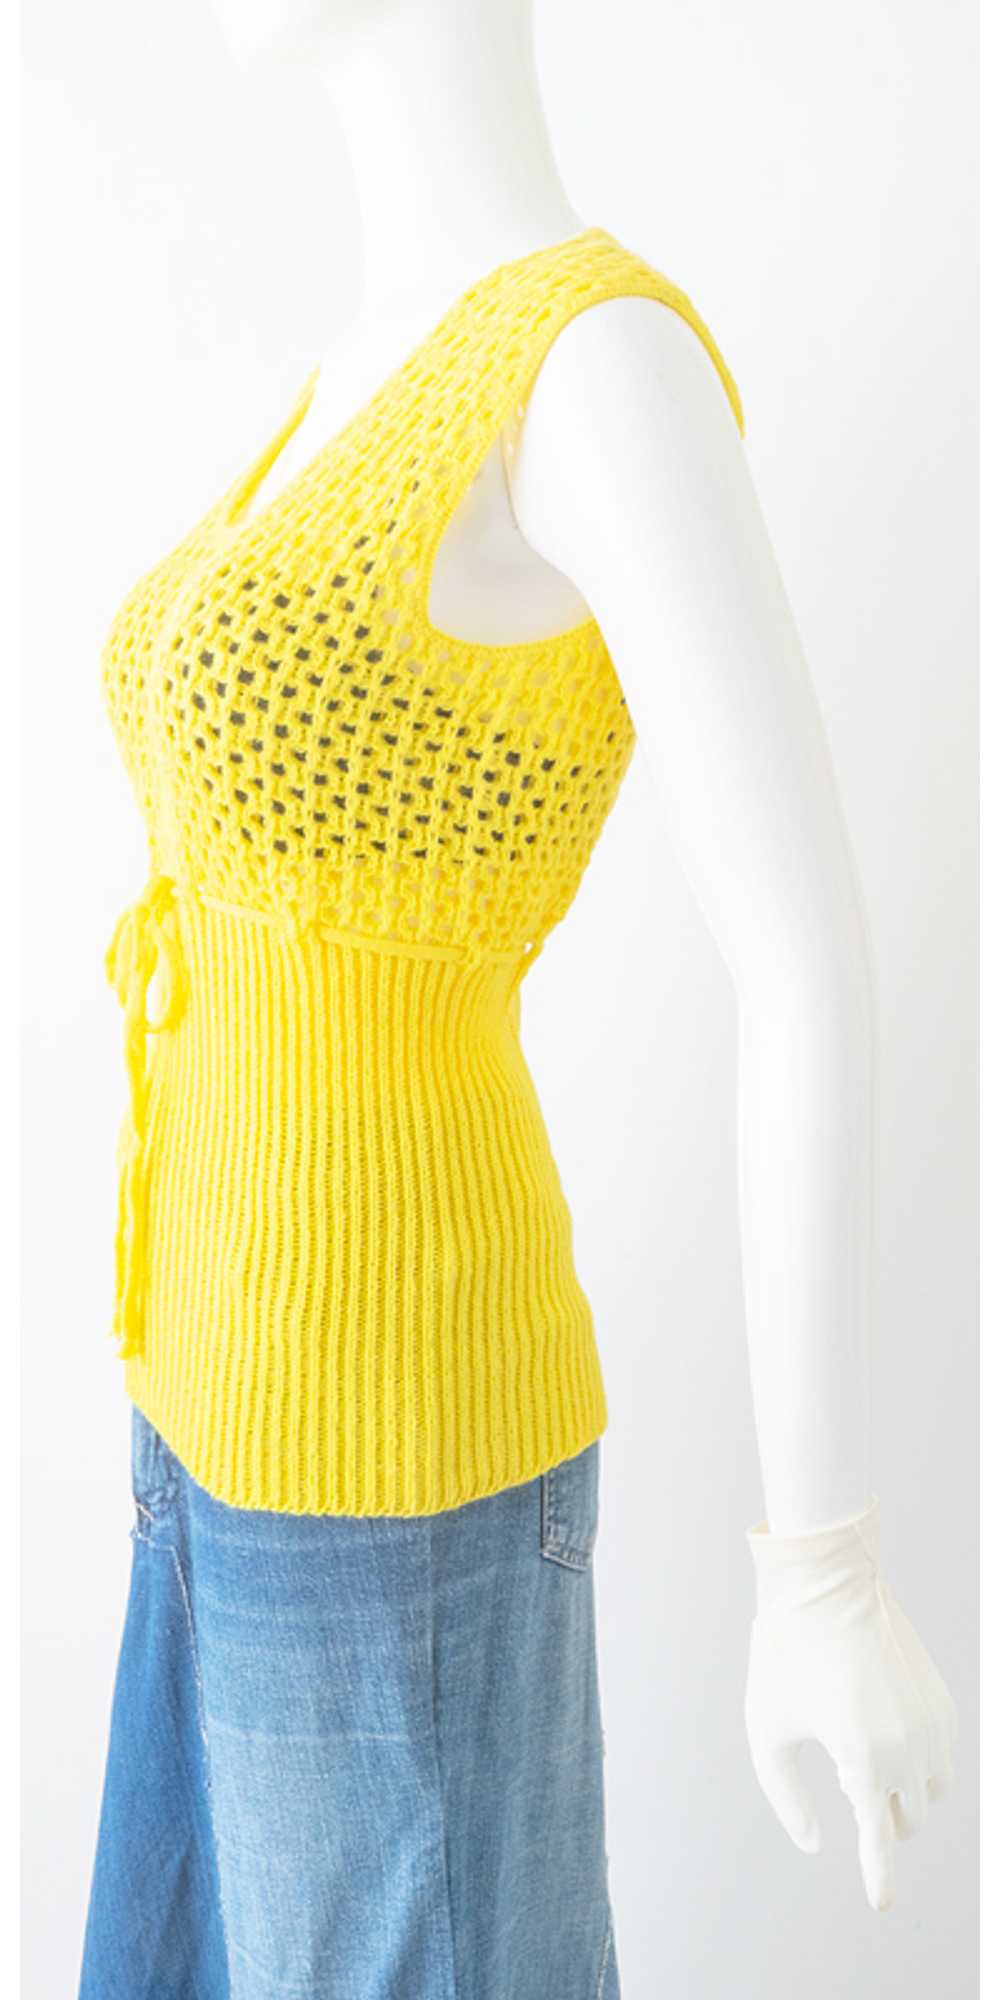 Never worn Bright Yellow 70s Crocheted Top - image 2